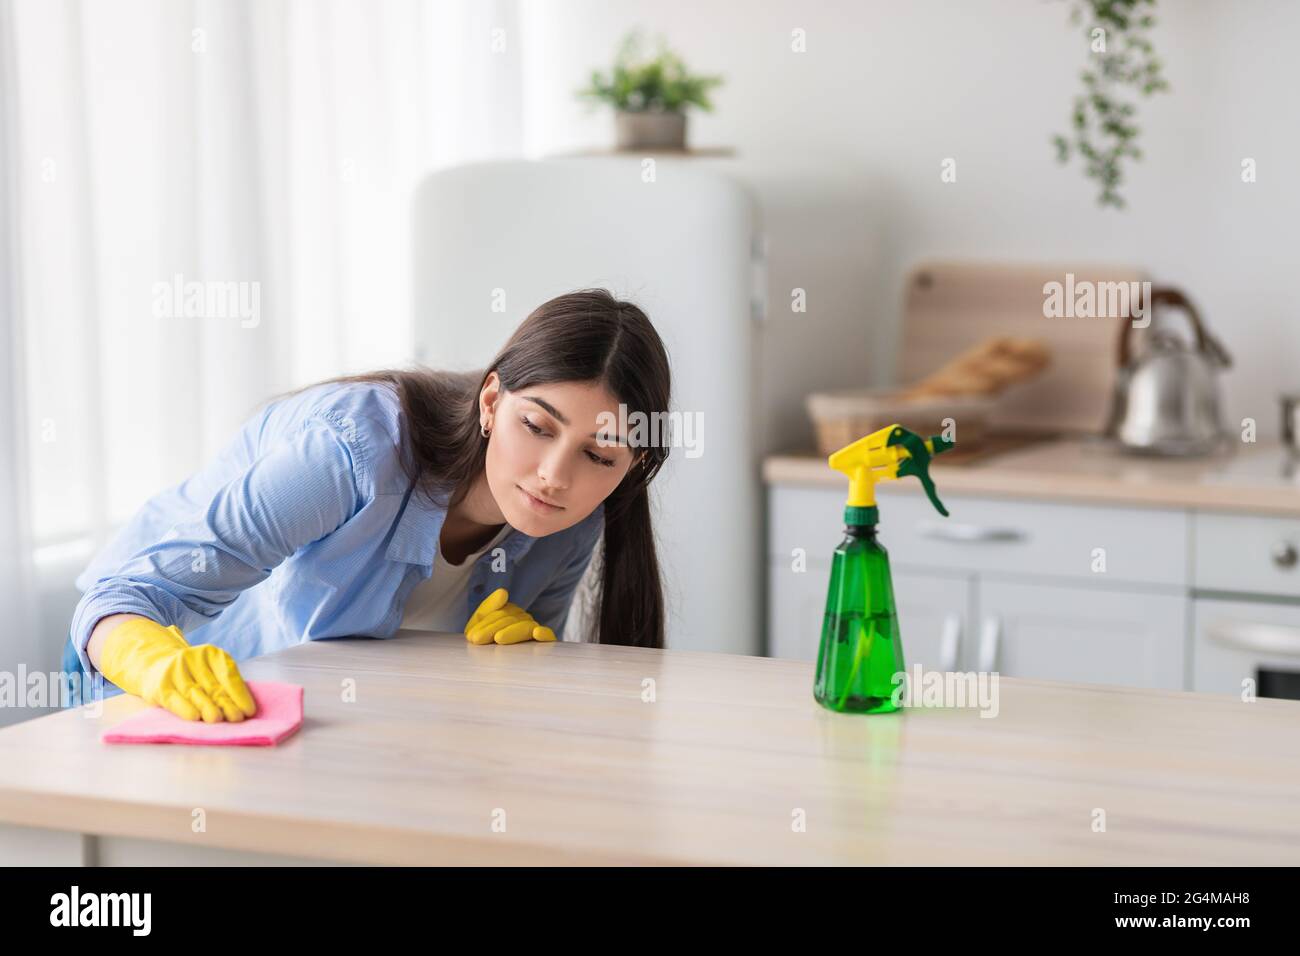 https://c8.alamy.com/comp/2G4MAH8/closeup-of-focused-young-woman-cleaning-table-with-cloth-2G4MAH8.jpg